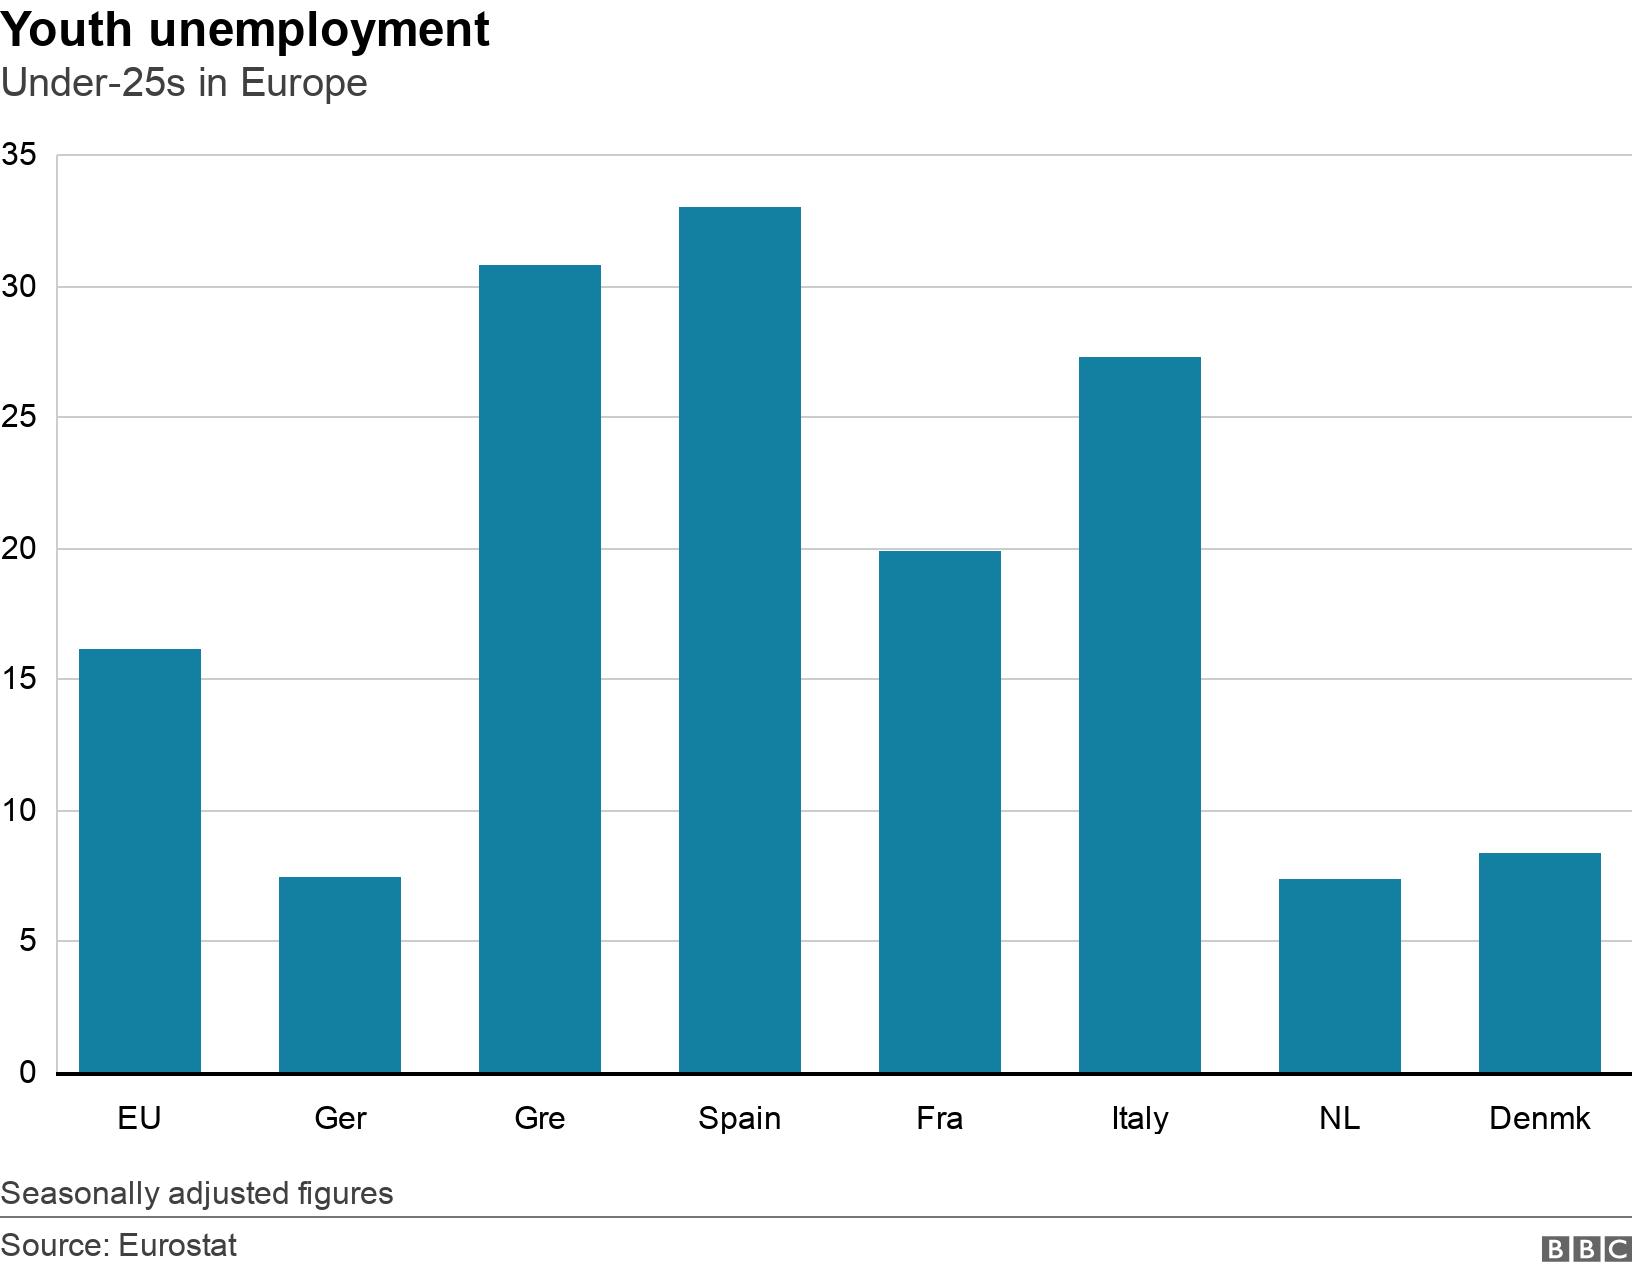 Youth unemployment. Under-25s in Europe. Under-25s unemployment in Europe Seasonally adjusted figures.